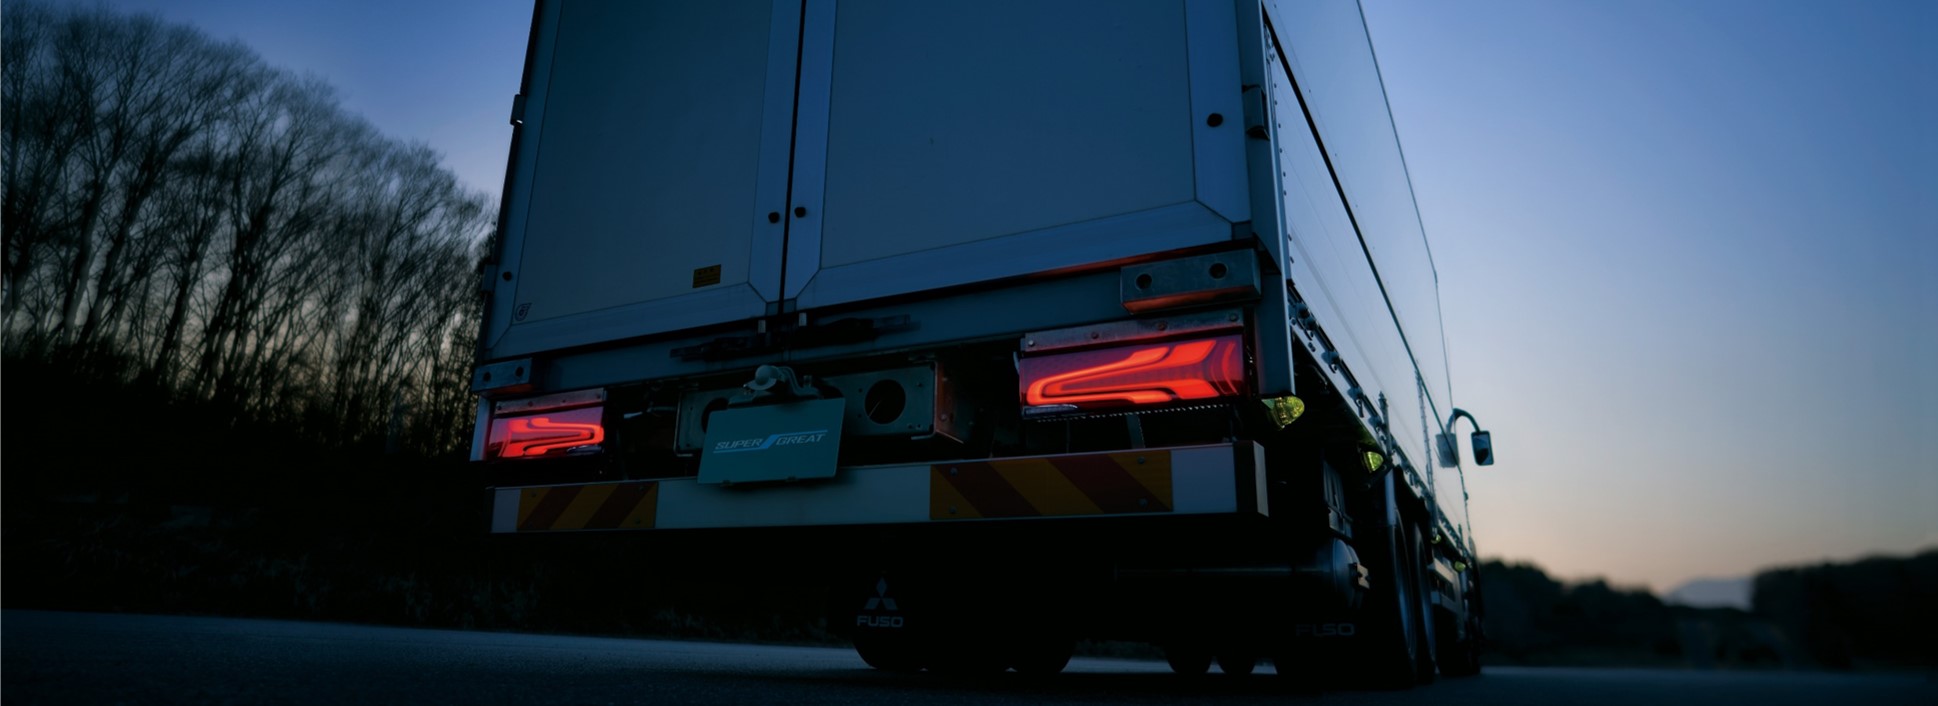 mitsubishi-fuso-launches-newly-designed-rear-combination-lamp-for-super-great